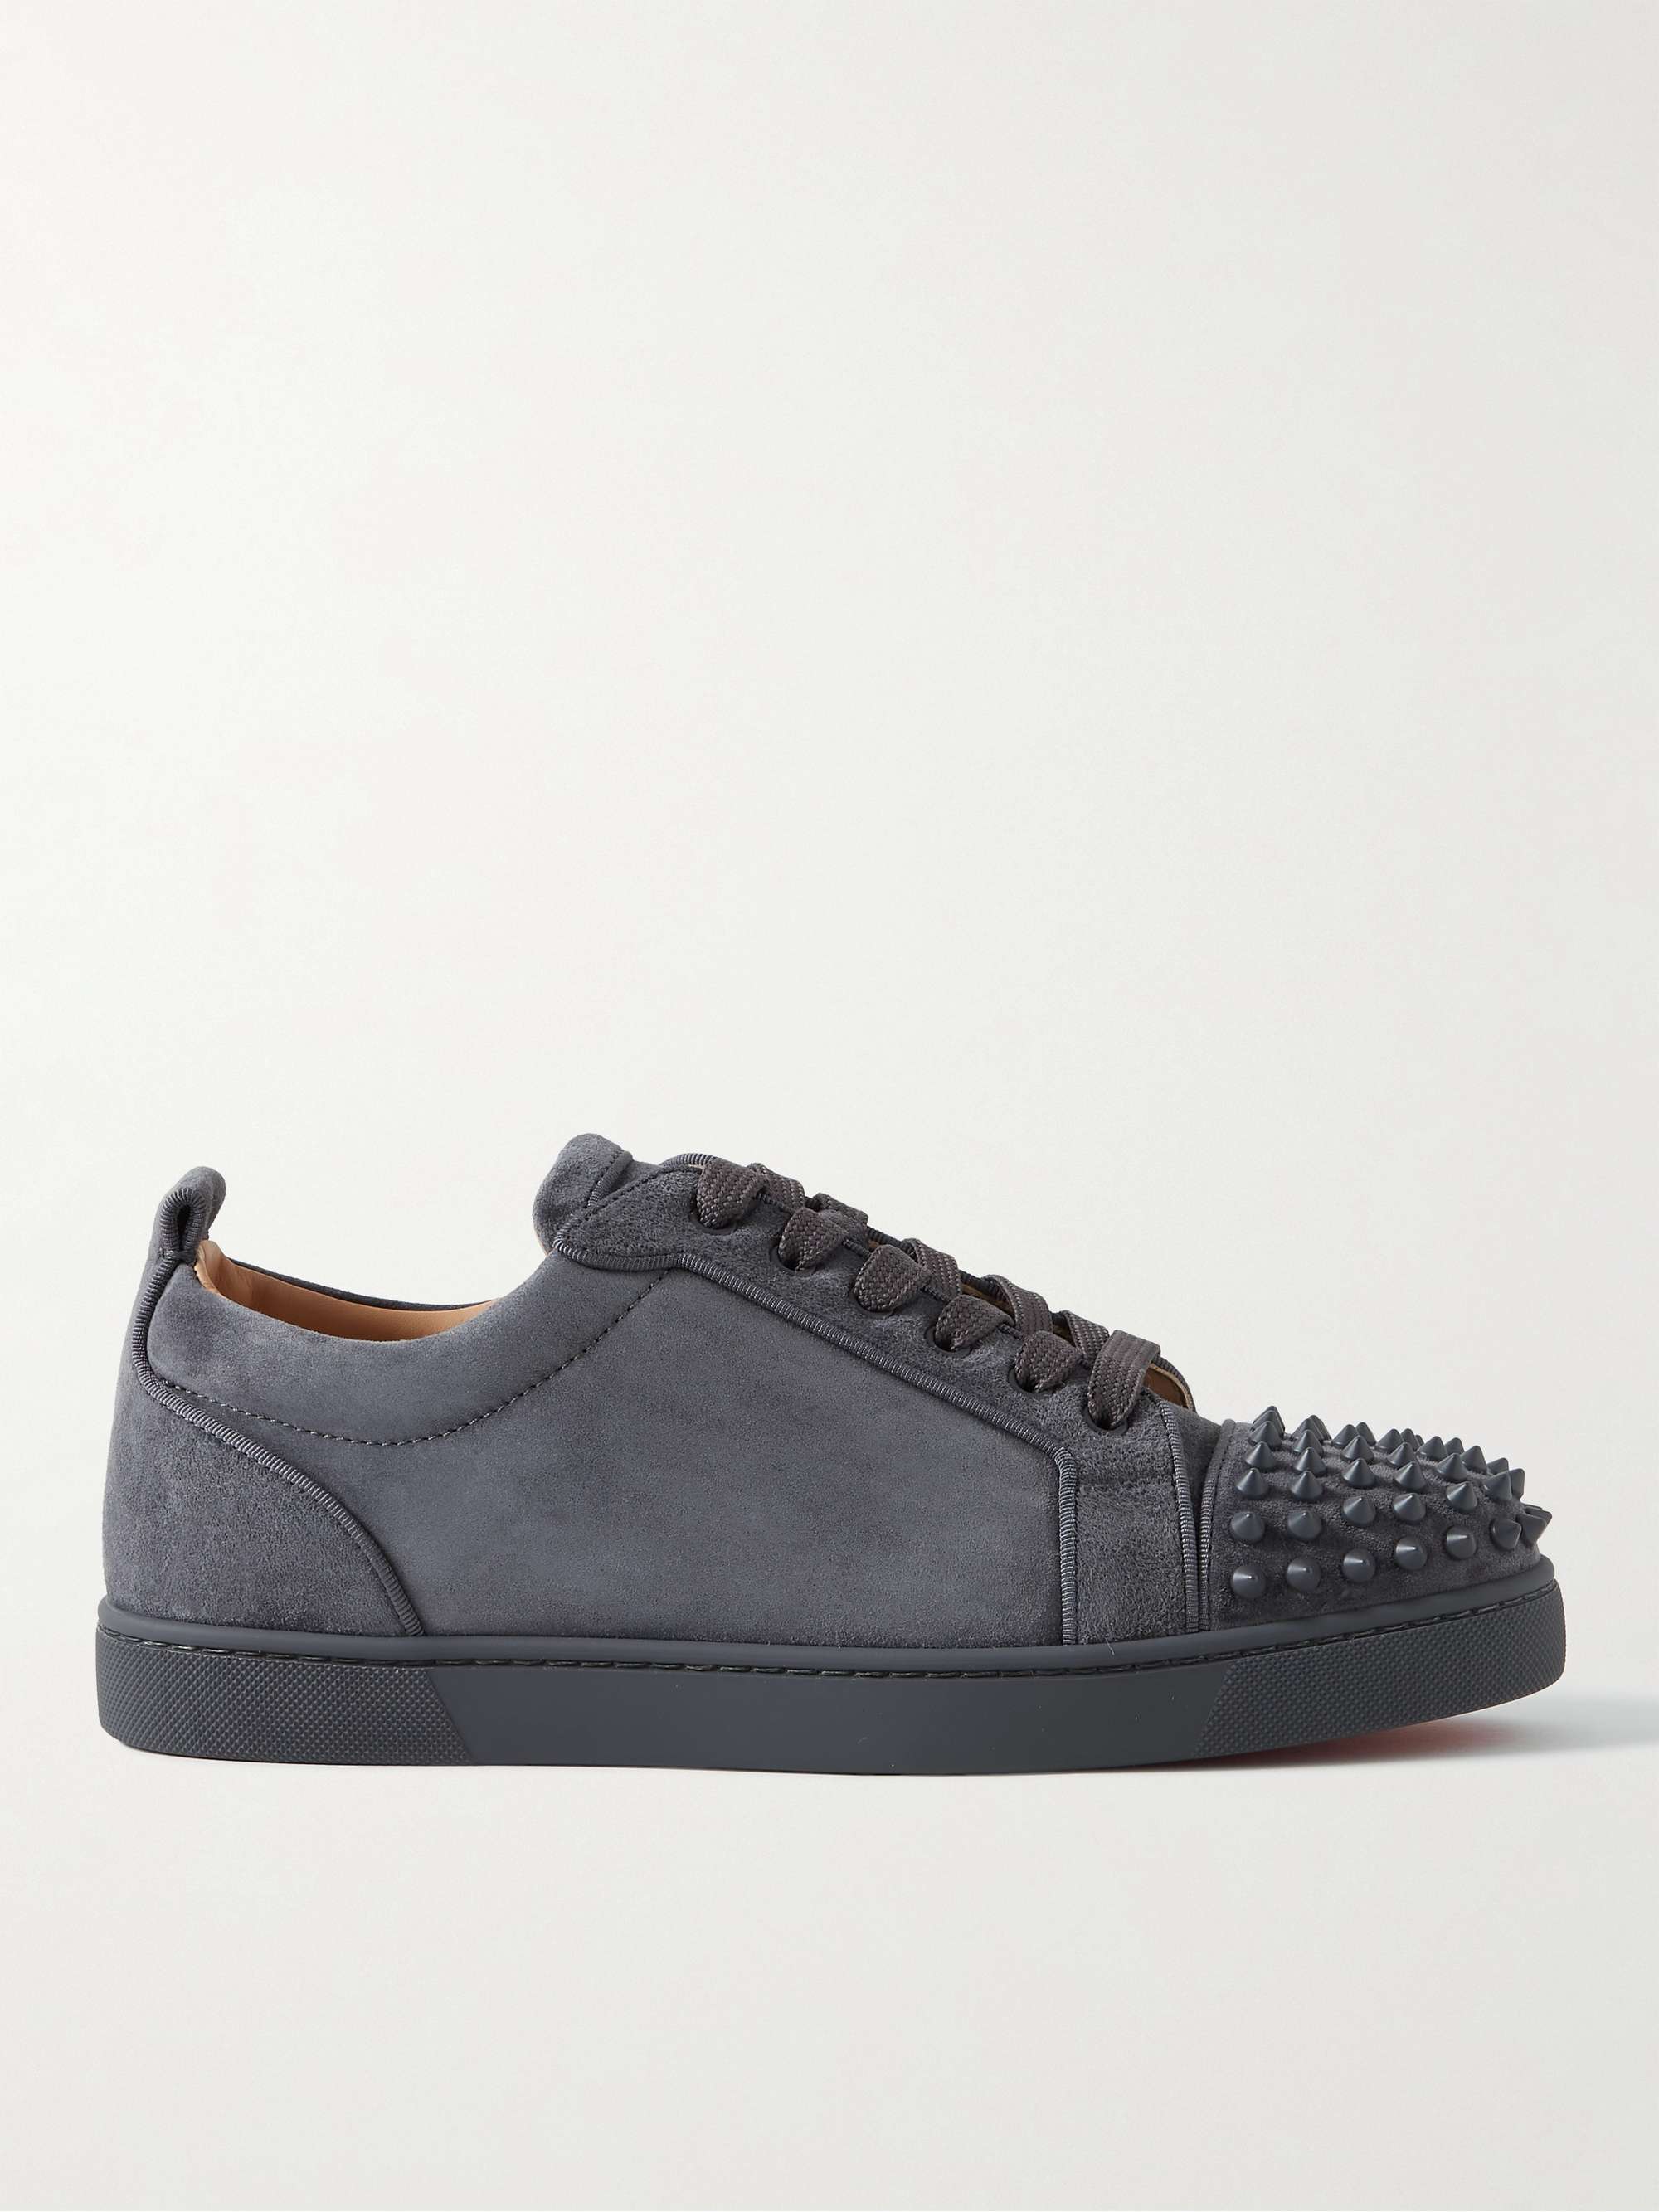 Men's CHRISTIAN LOUBOUTIN Sneakers US 10 Navy Suede and Leather